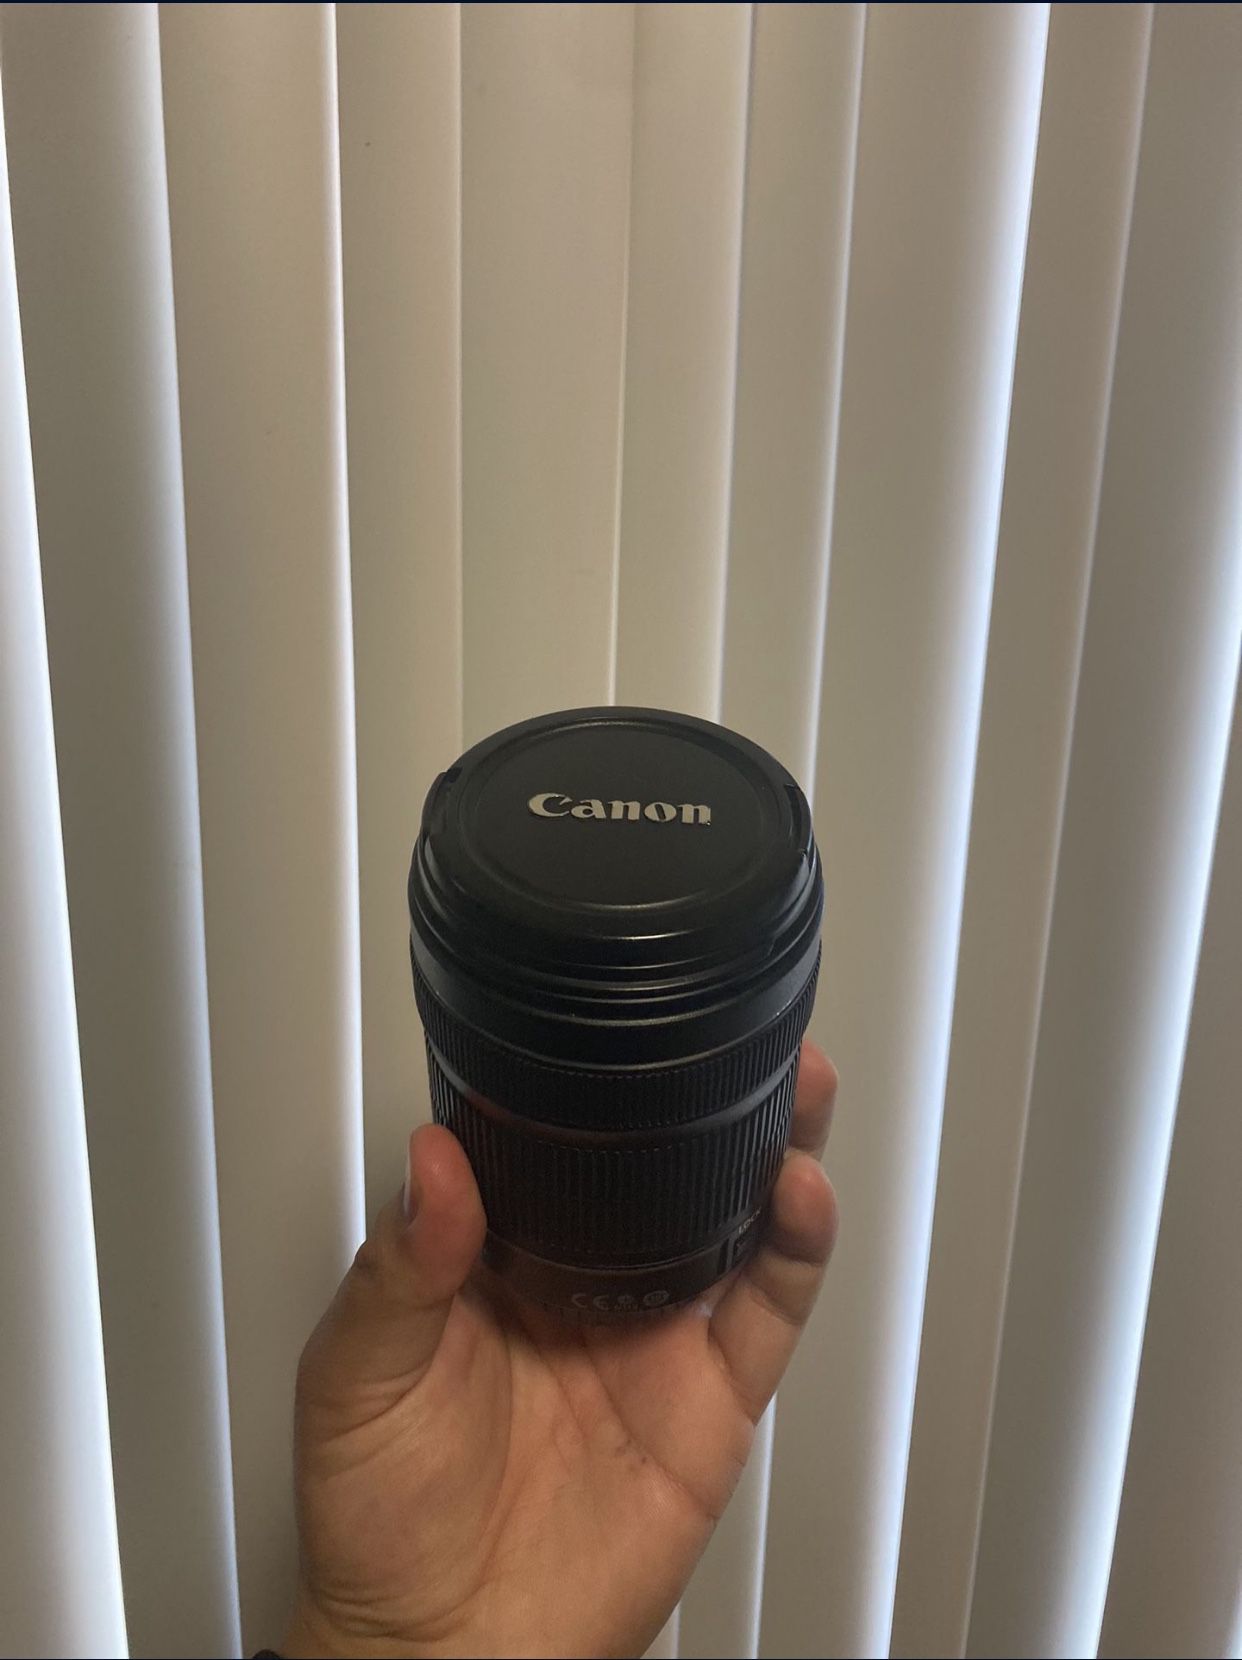 Canon EF-S 18-135mm Lens